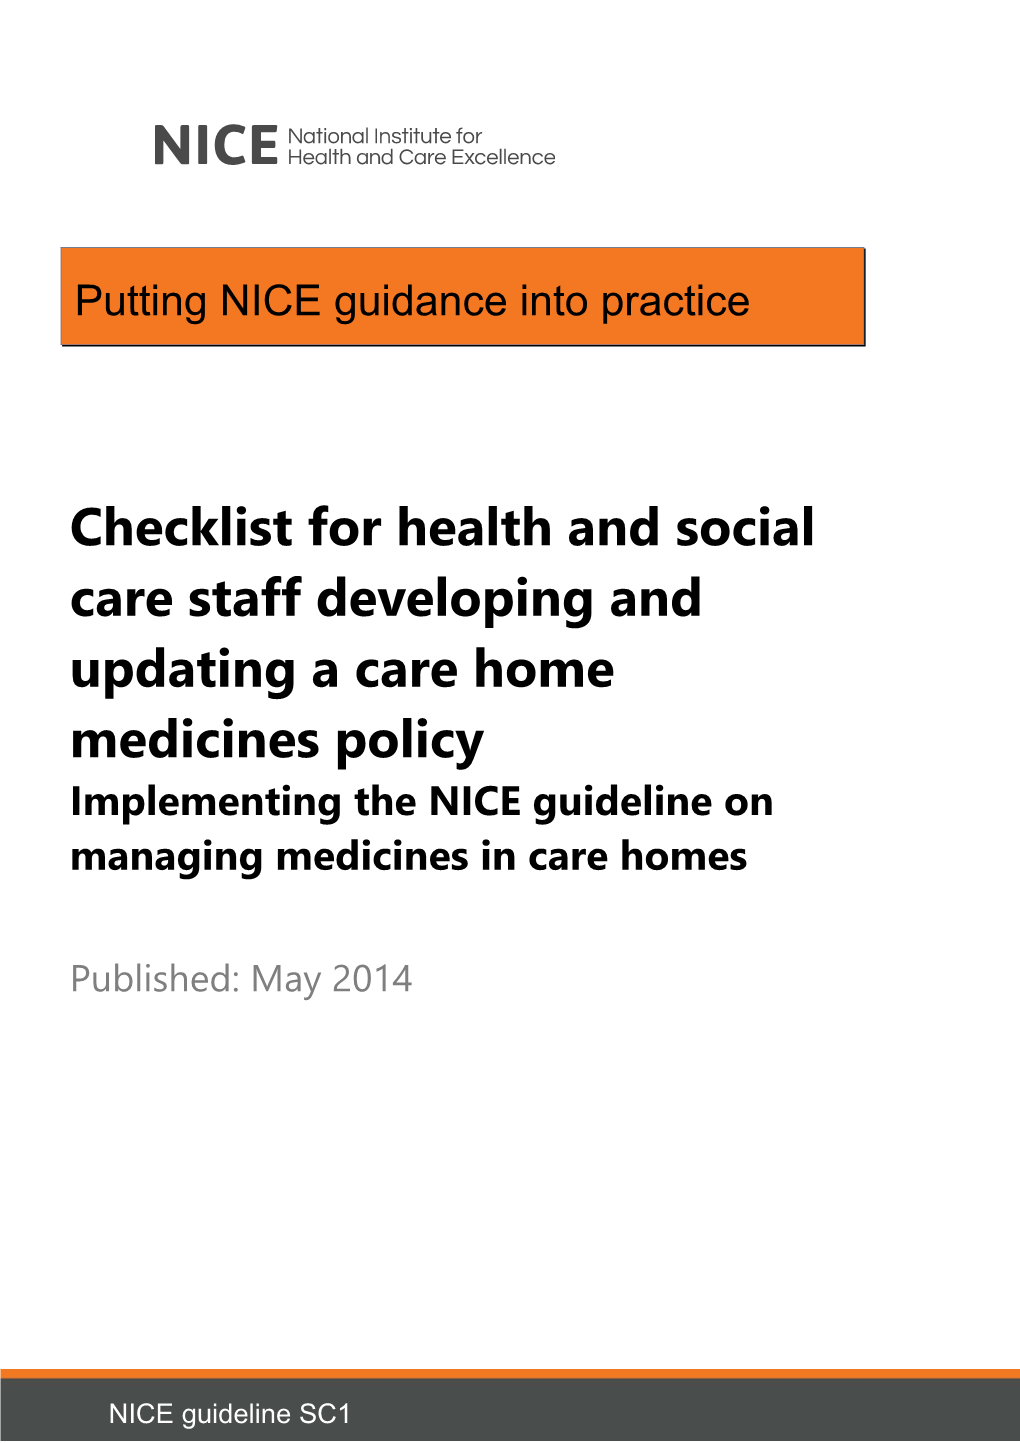 Implementing the NICE Guideline on Managing Medicines in Care Homes